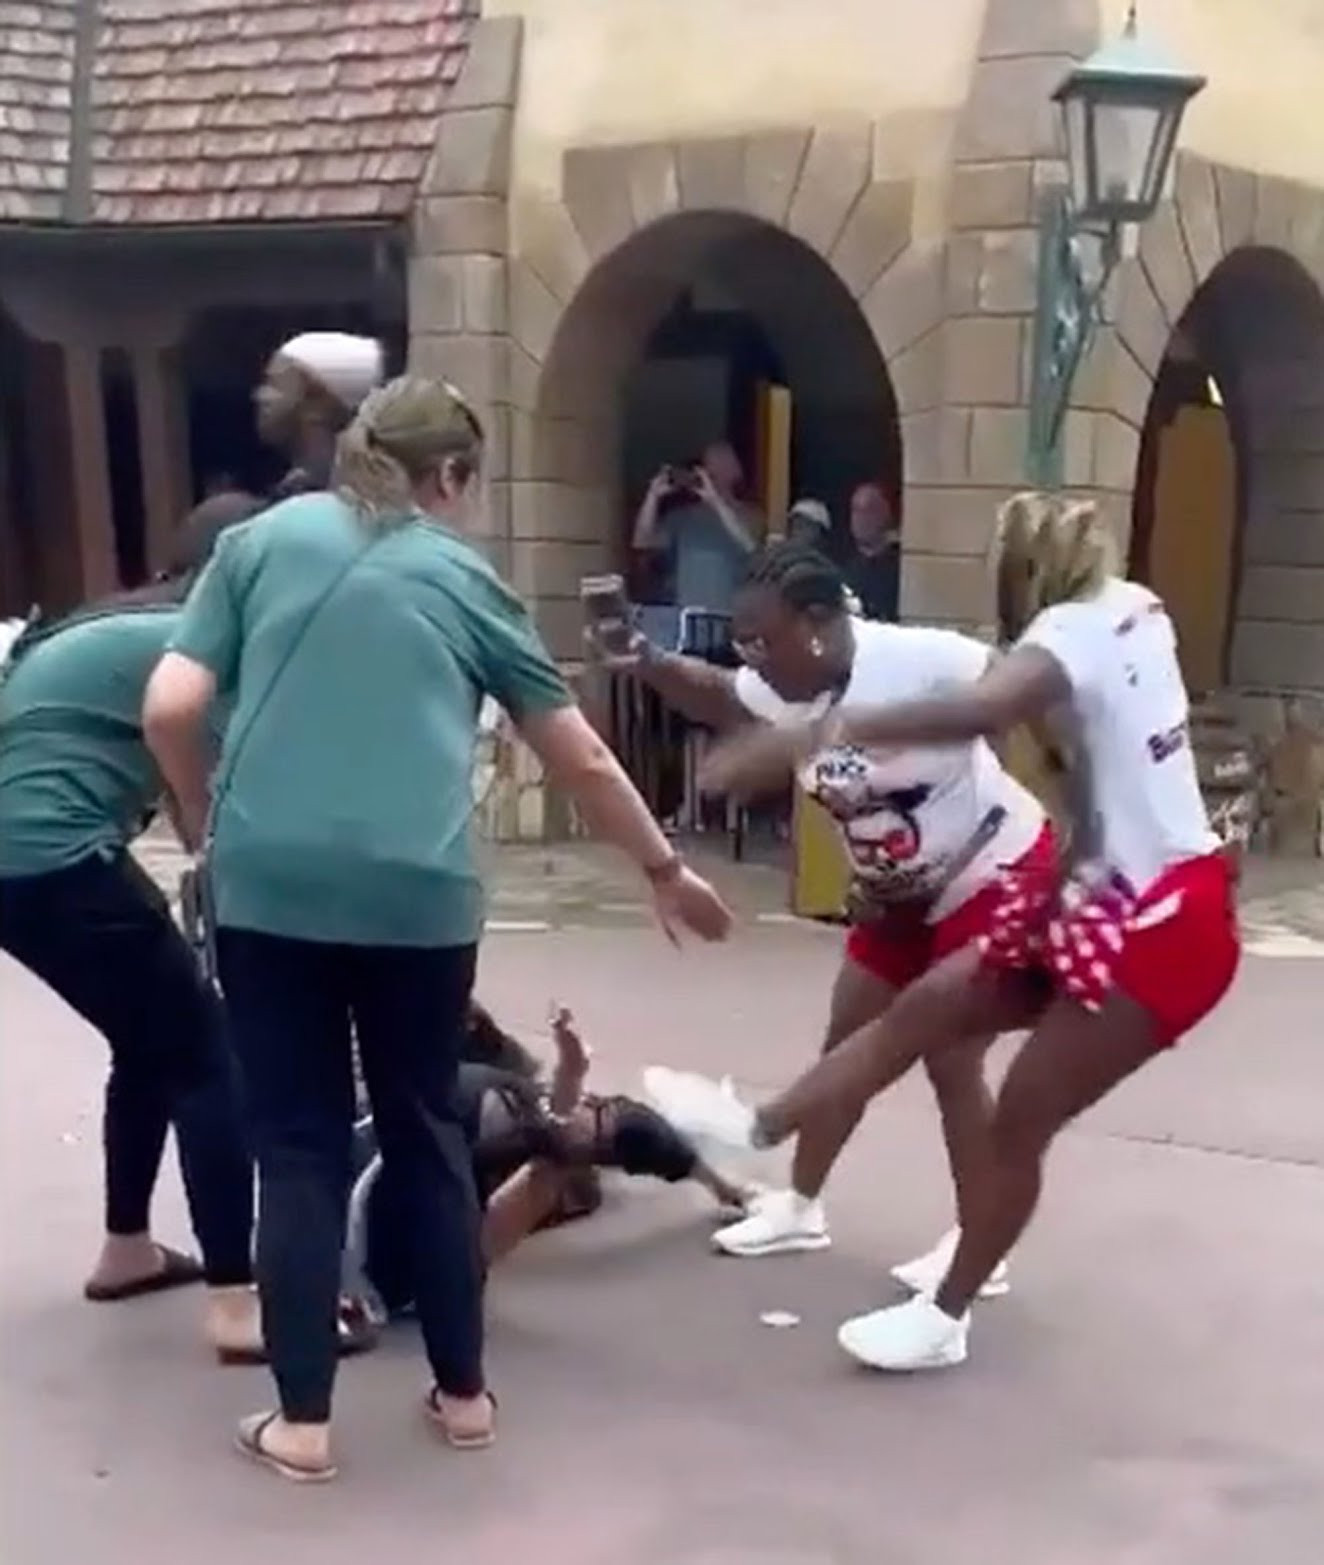 Brawl among families breaks out at Disney World, hospitalizing one (photos/video)